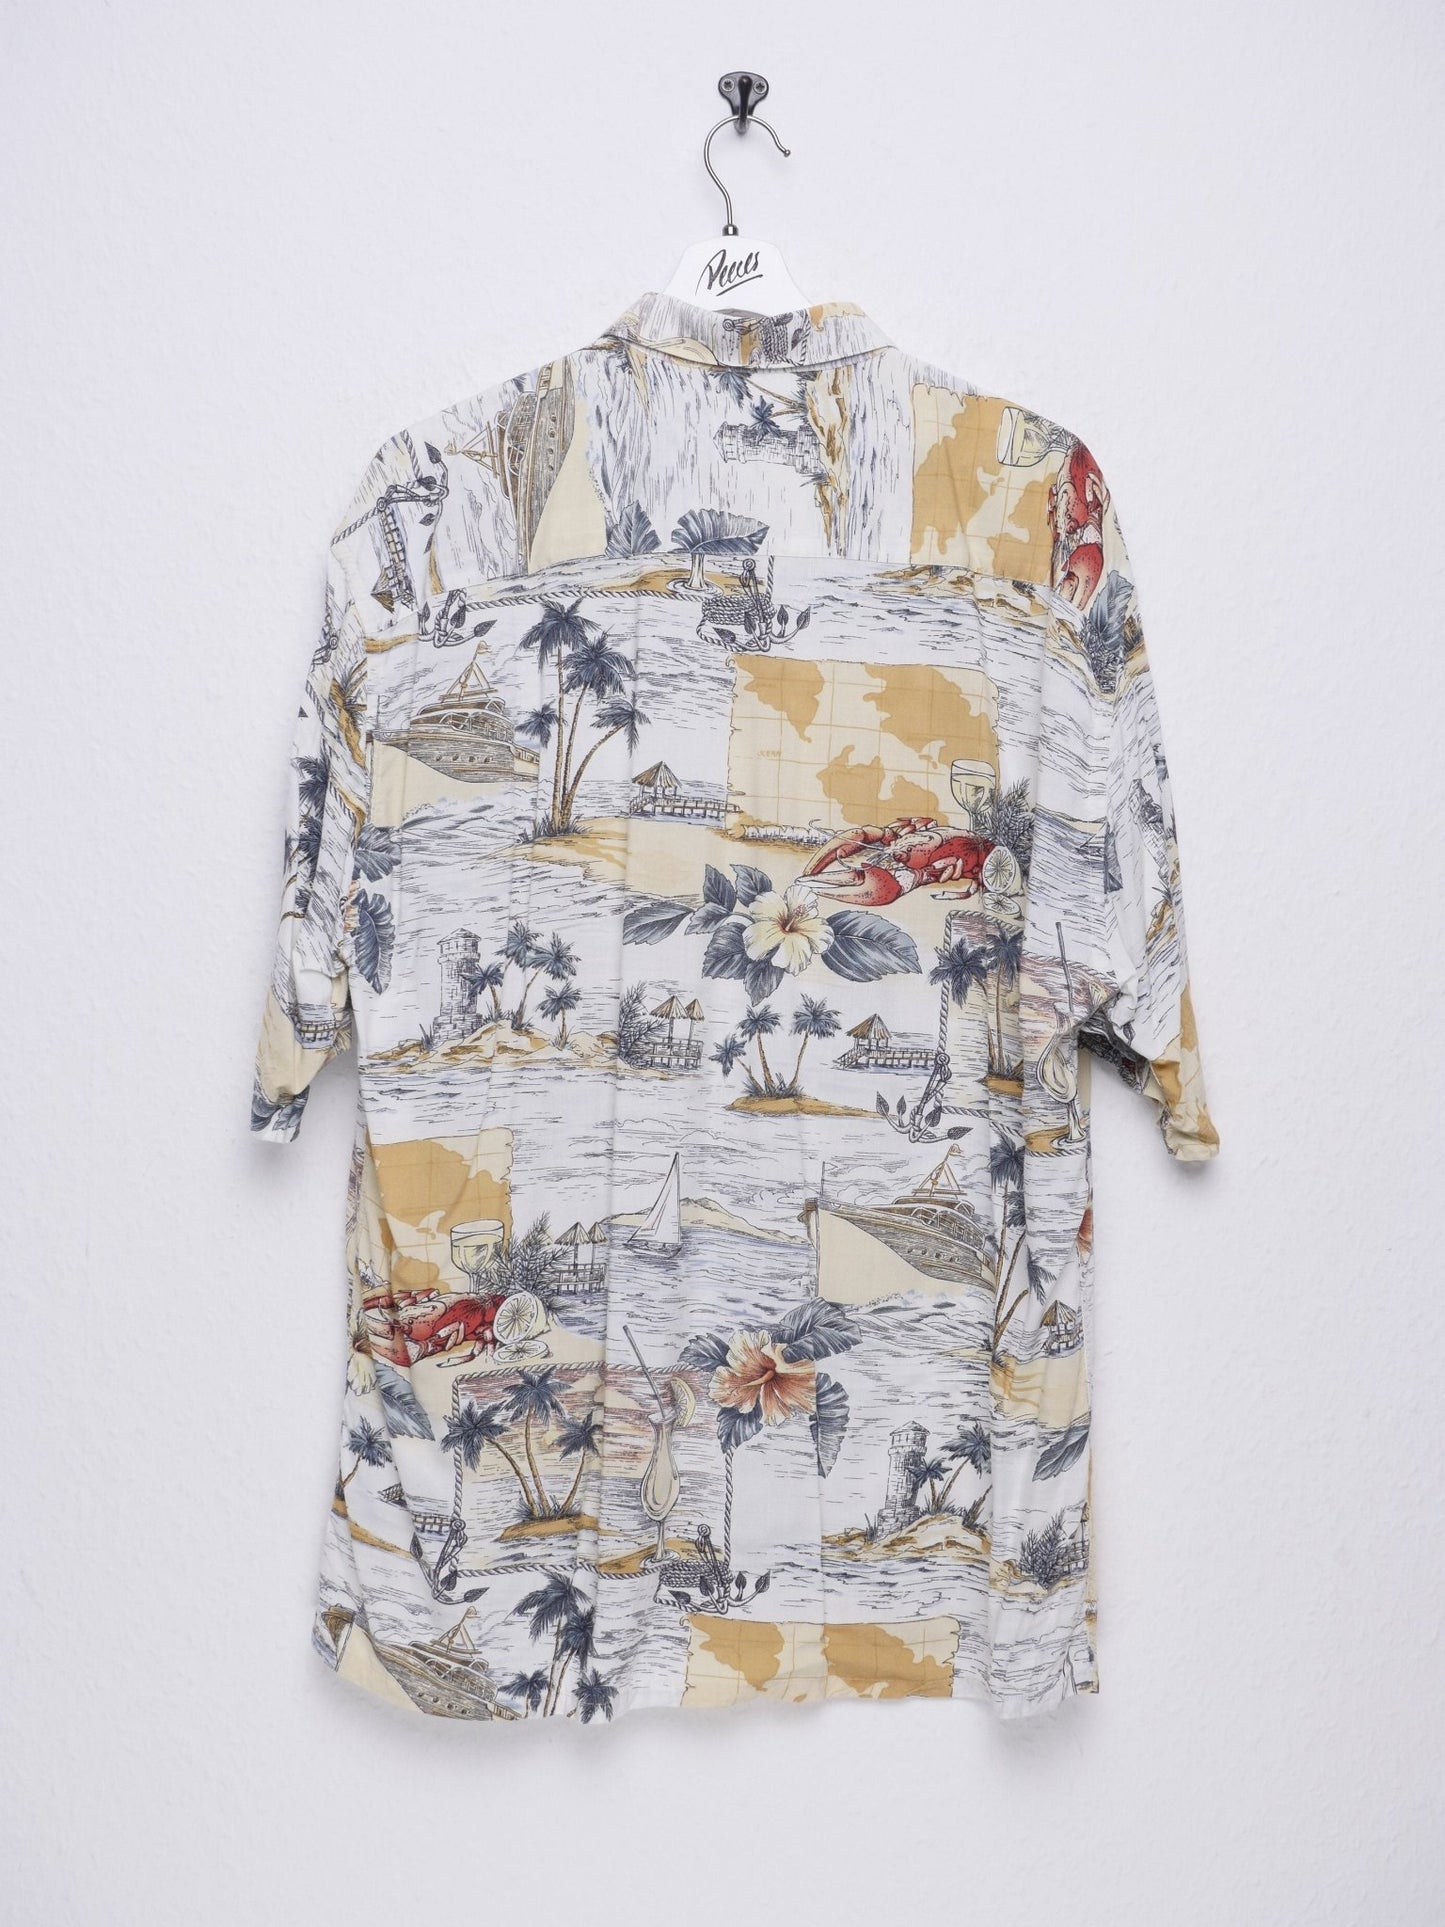 'Vacation' printed Pattern multicolored S/S Hemd - Peeces